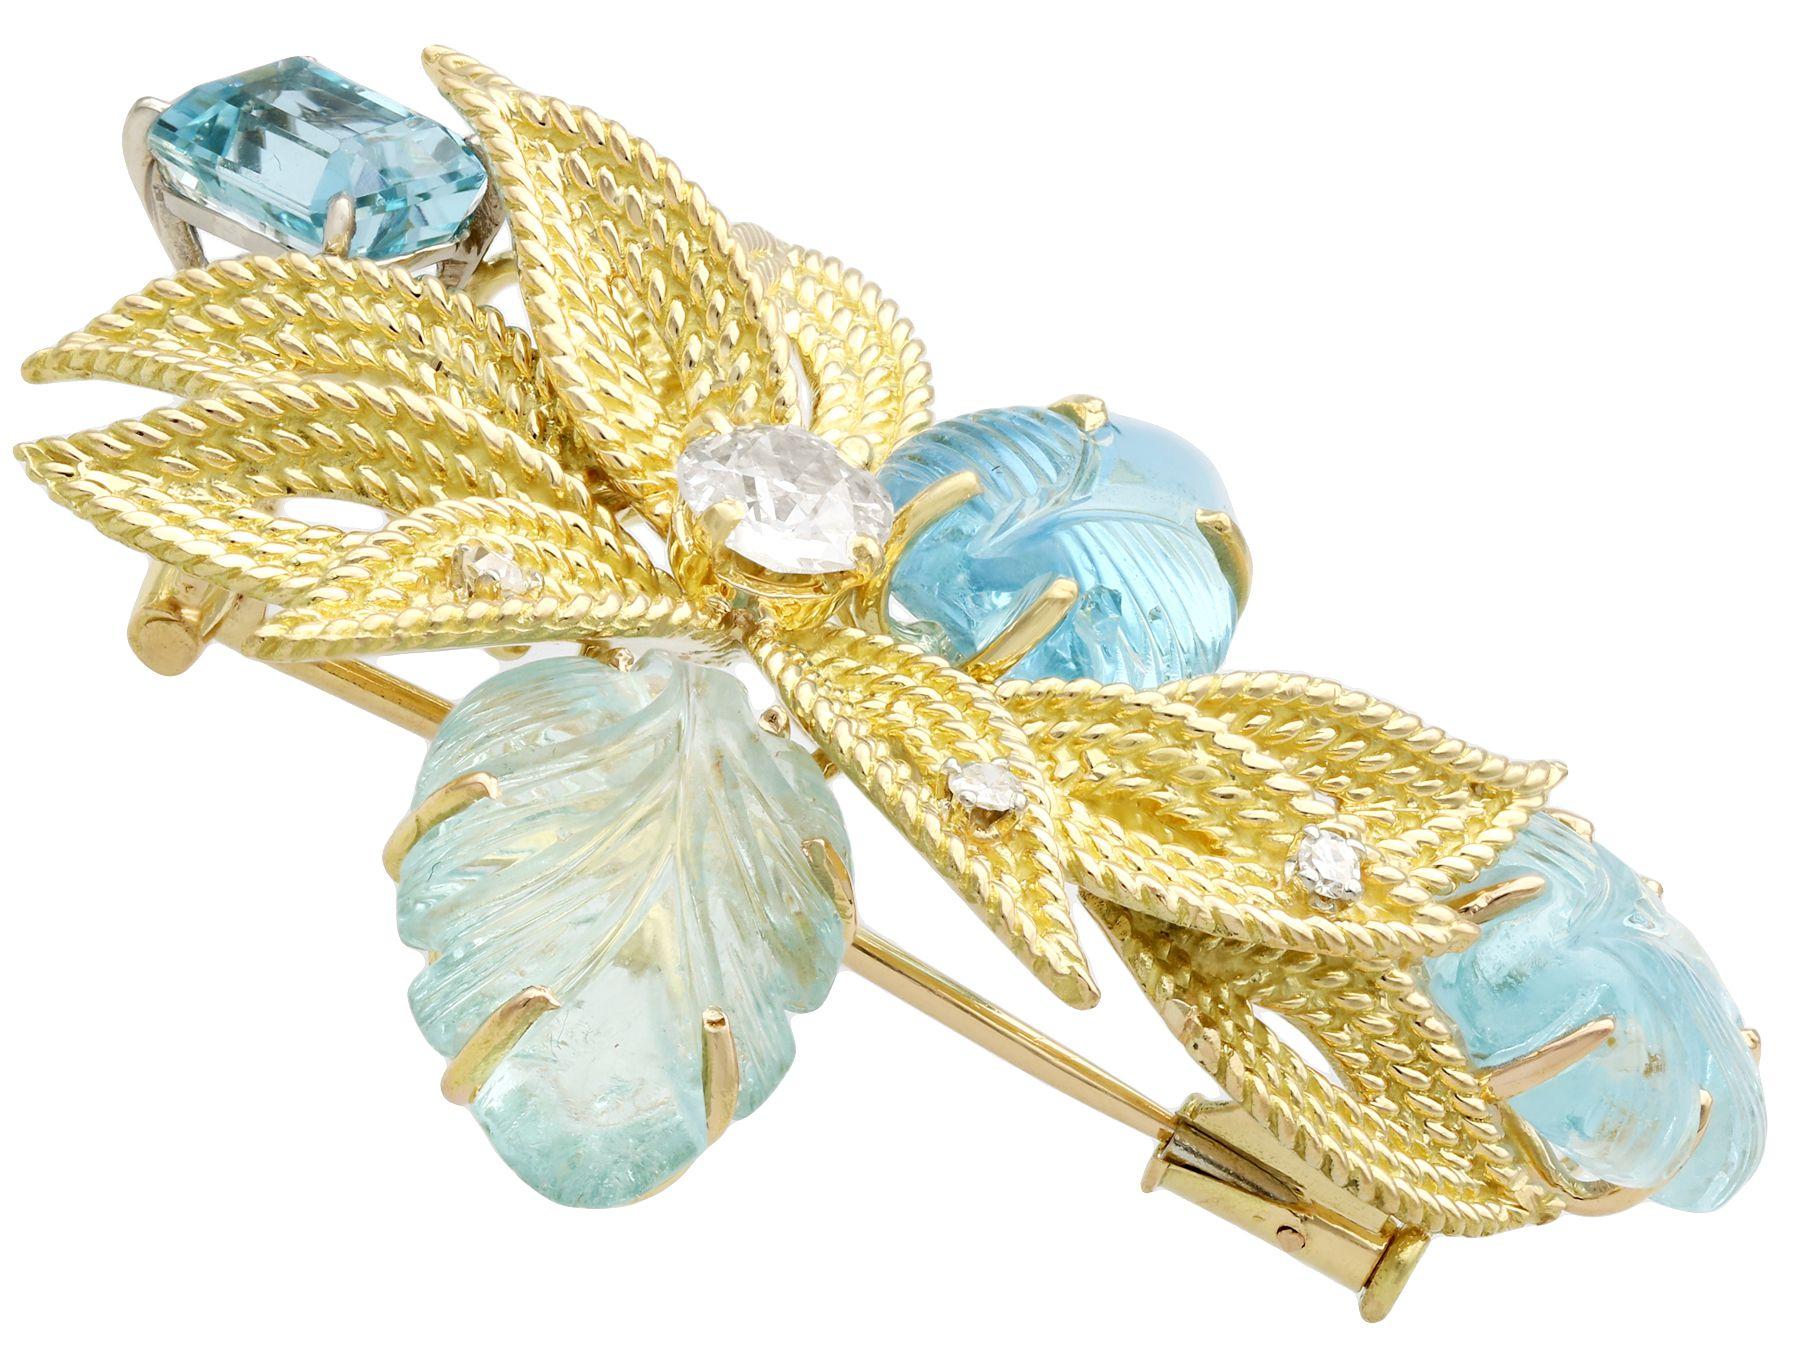 12.5 Carat Aquamarine Diamond Yellow Gold Brooch In Excellent Condition For Sale In Jesmond, Newcastle Upon Tyne